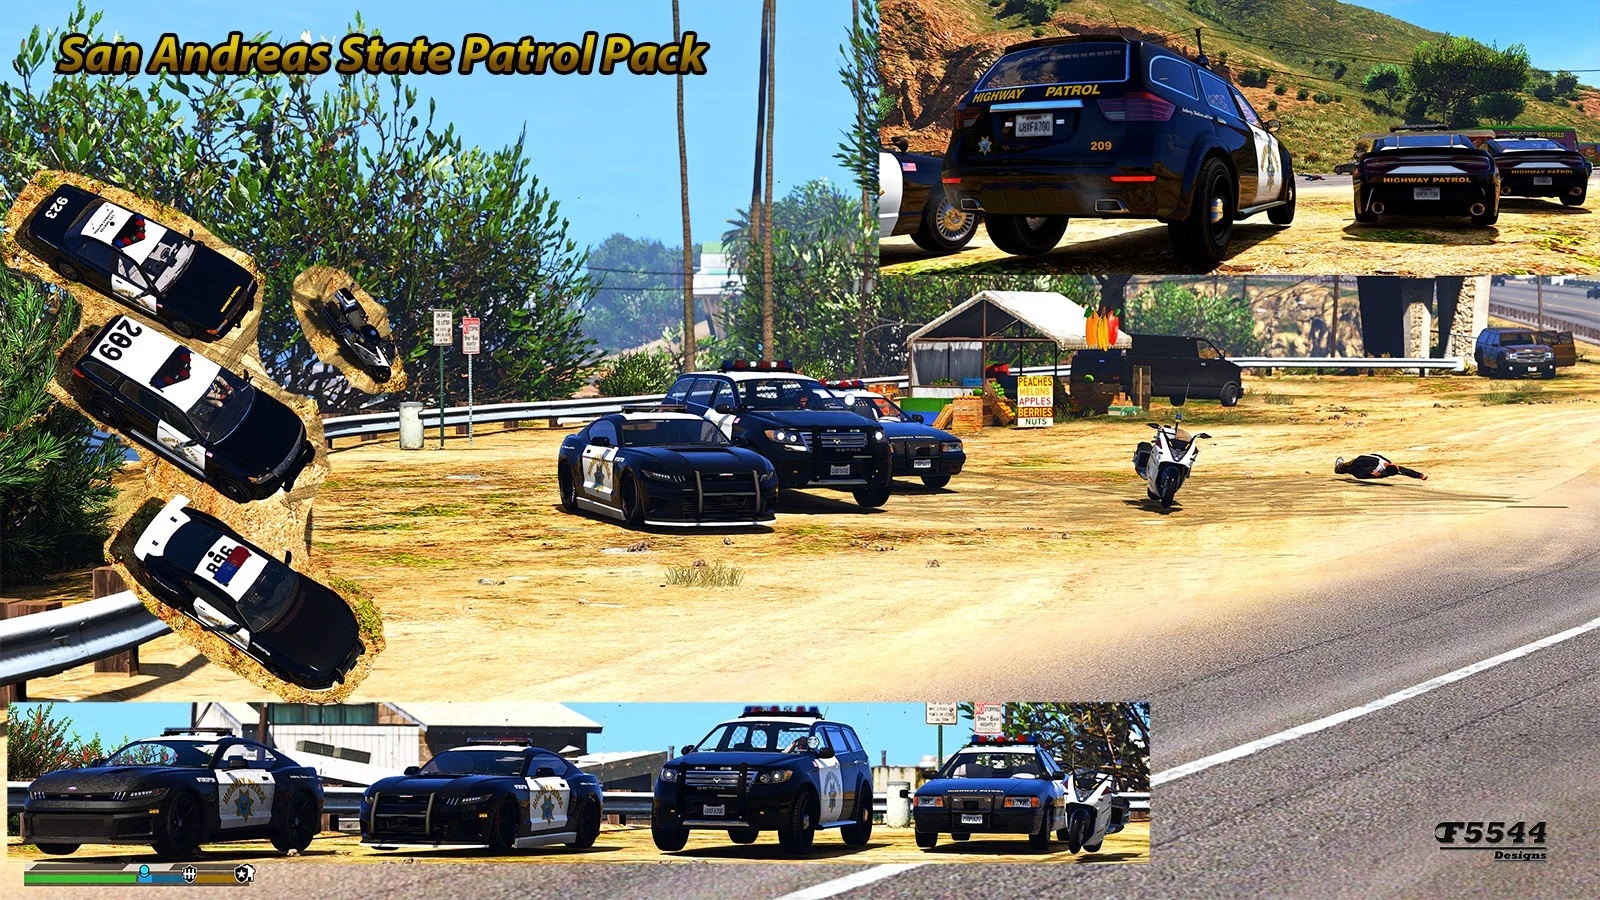 San Andreas Highway Patrol pack [Add-On / OIV | Sounds] v1.1.1 fixed invalid model